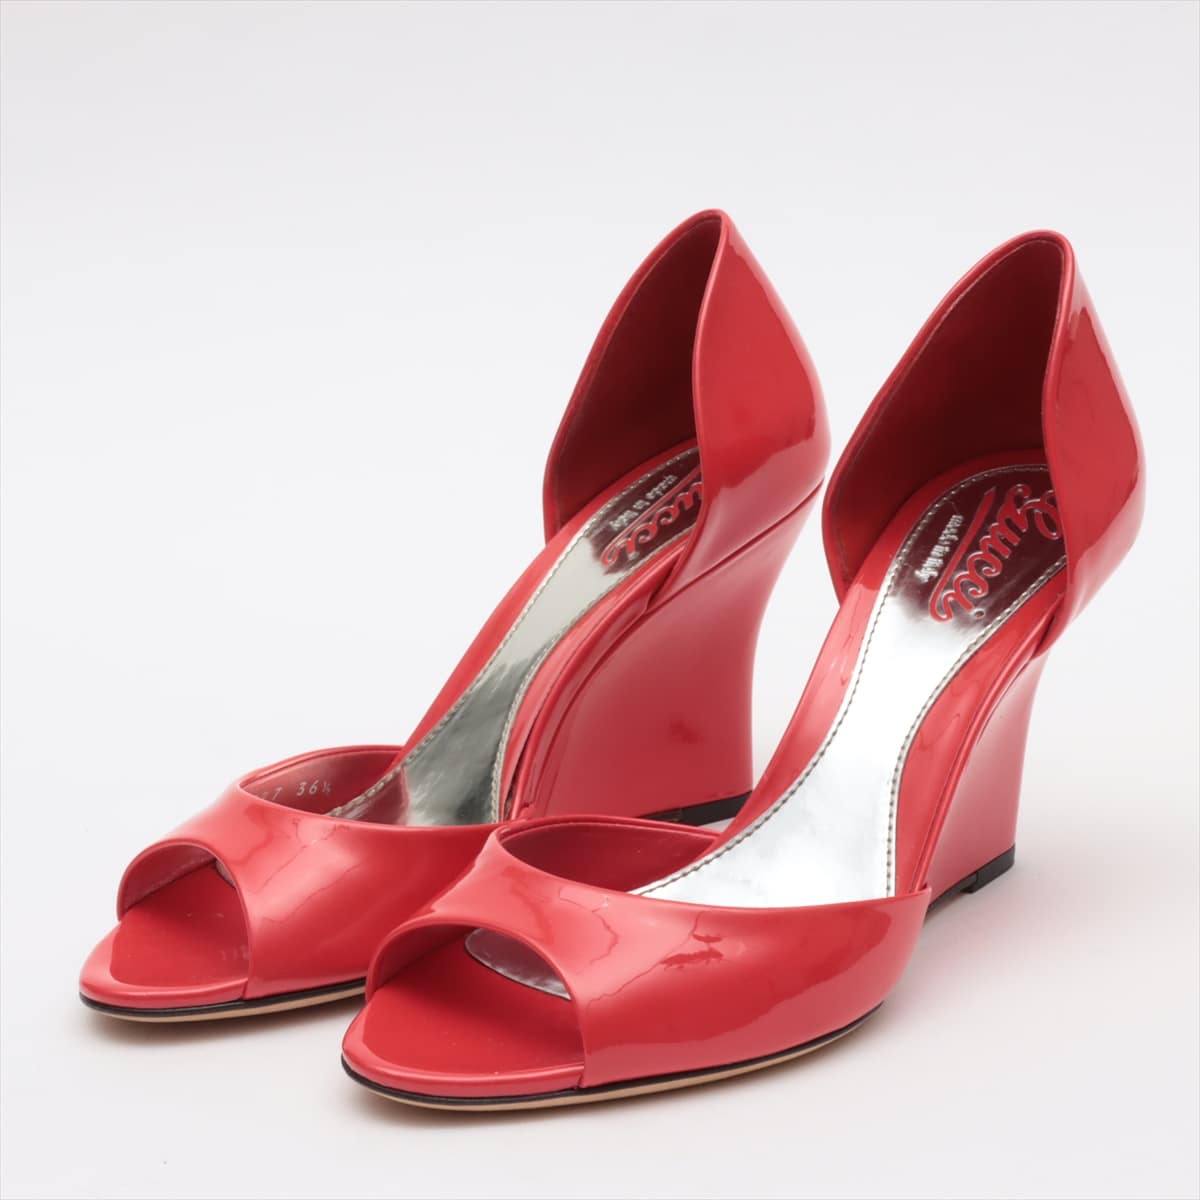 Gucci Patent leather Open-toe Pumps 36 1/2 Ladies' Red 234827